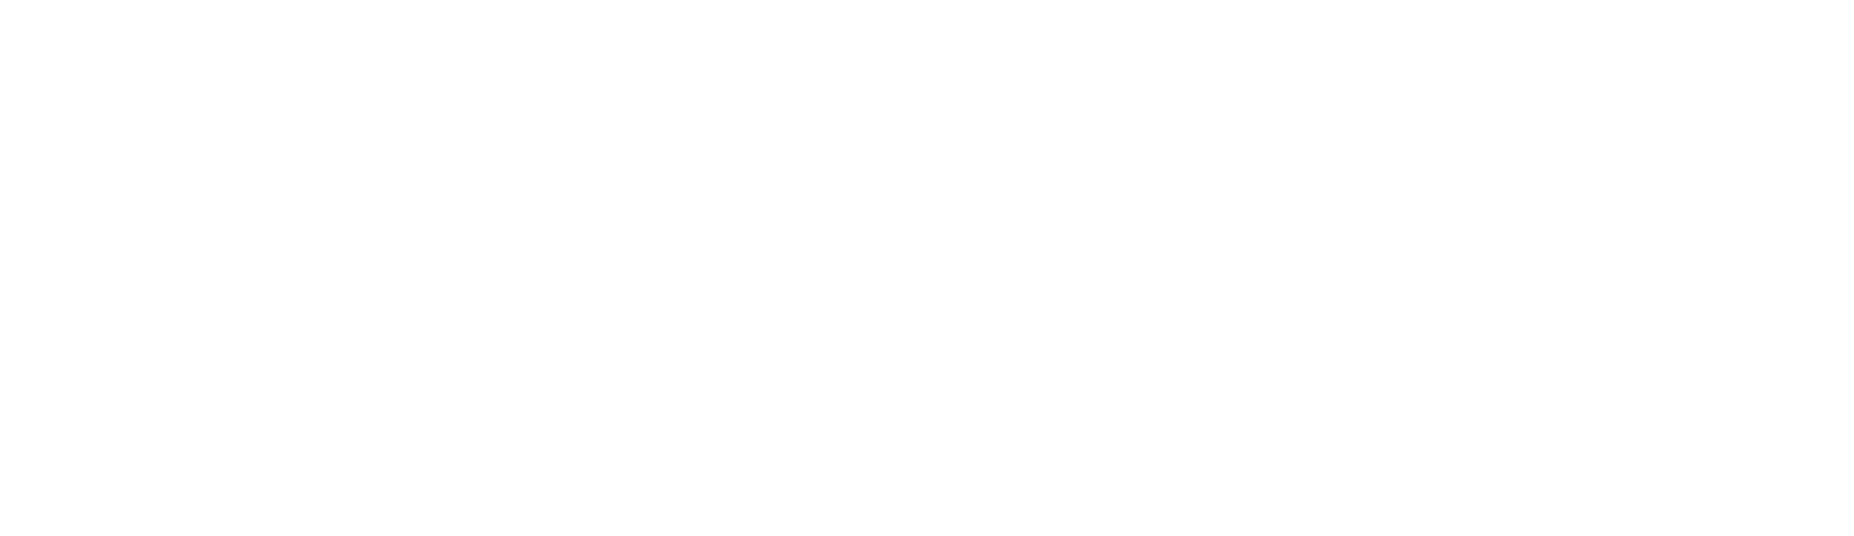 white logo for Tudor Farmhouse Hotel, Clearwell, Forest of Dean